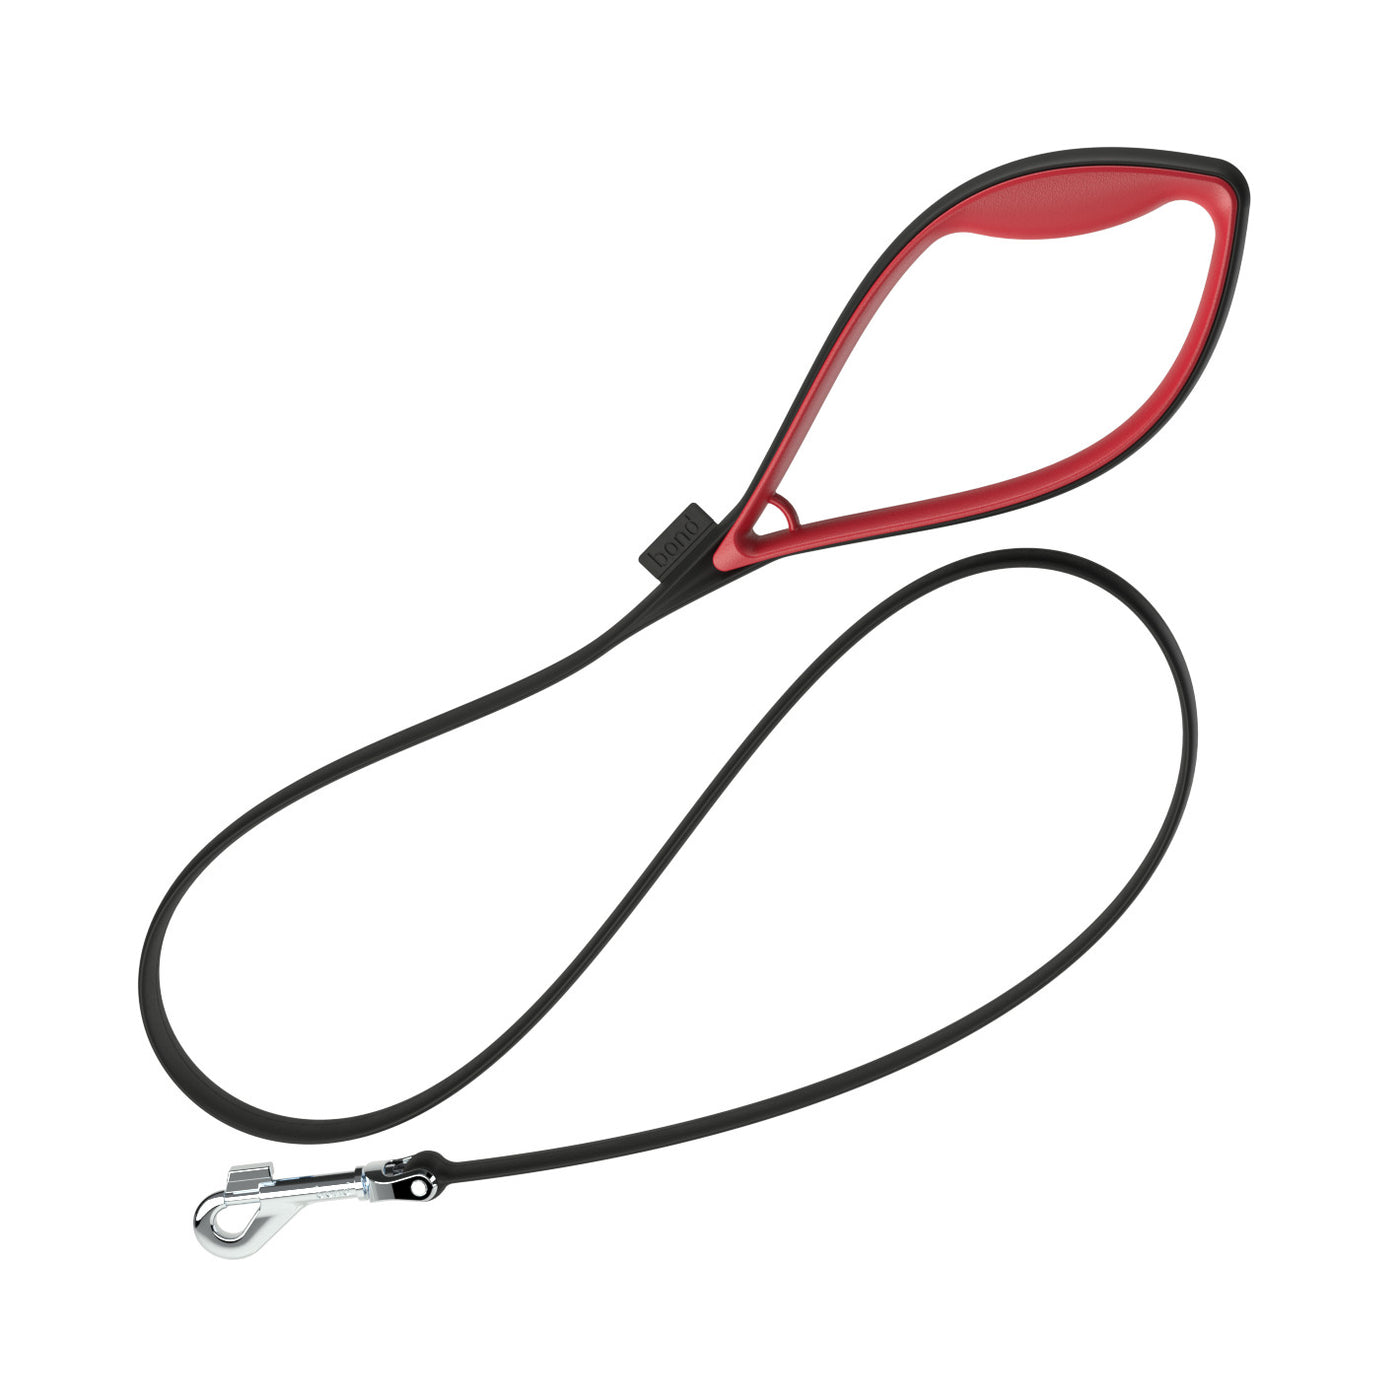 Black leash with red grip